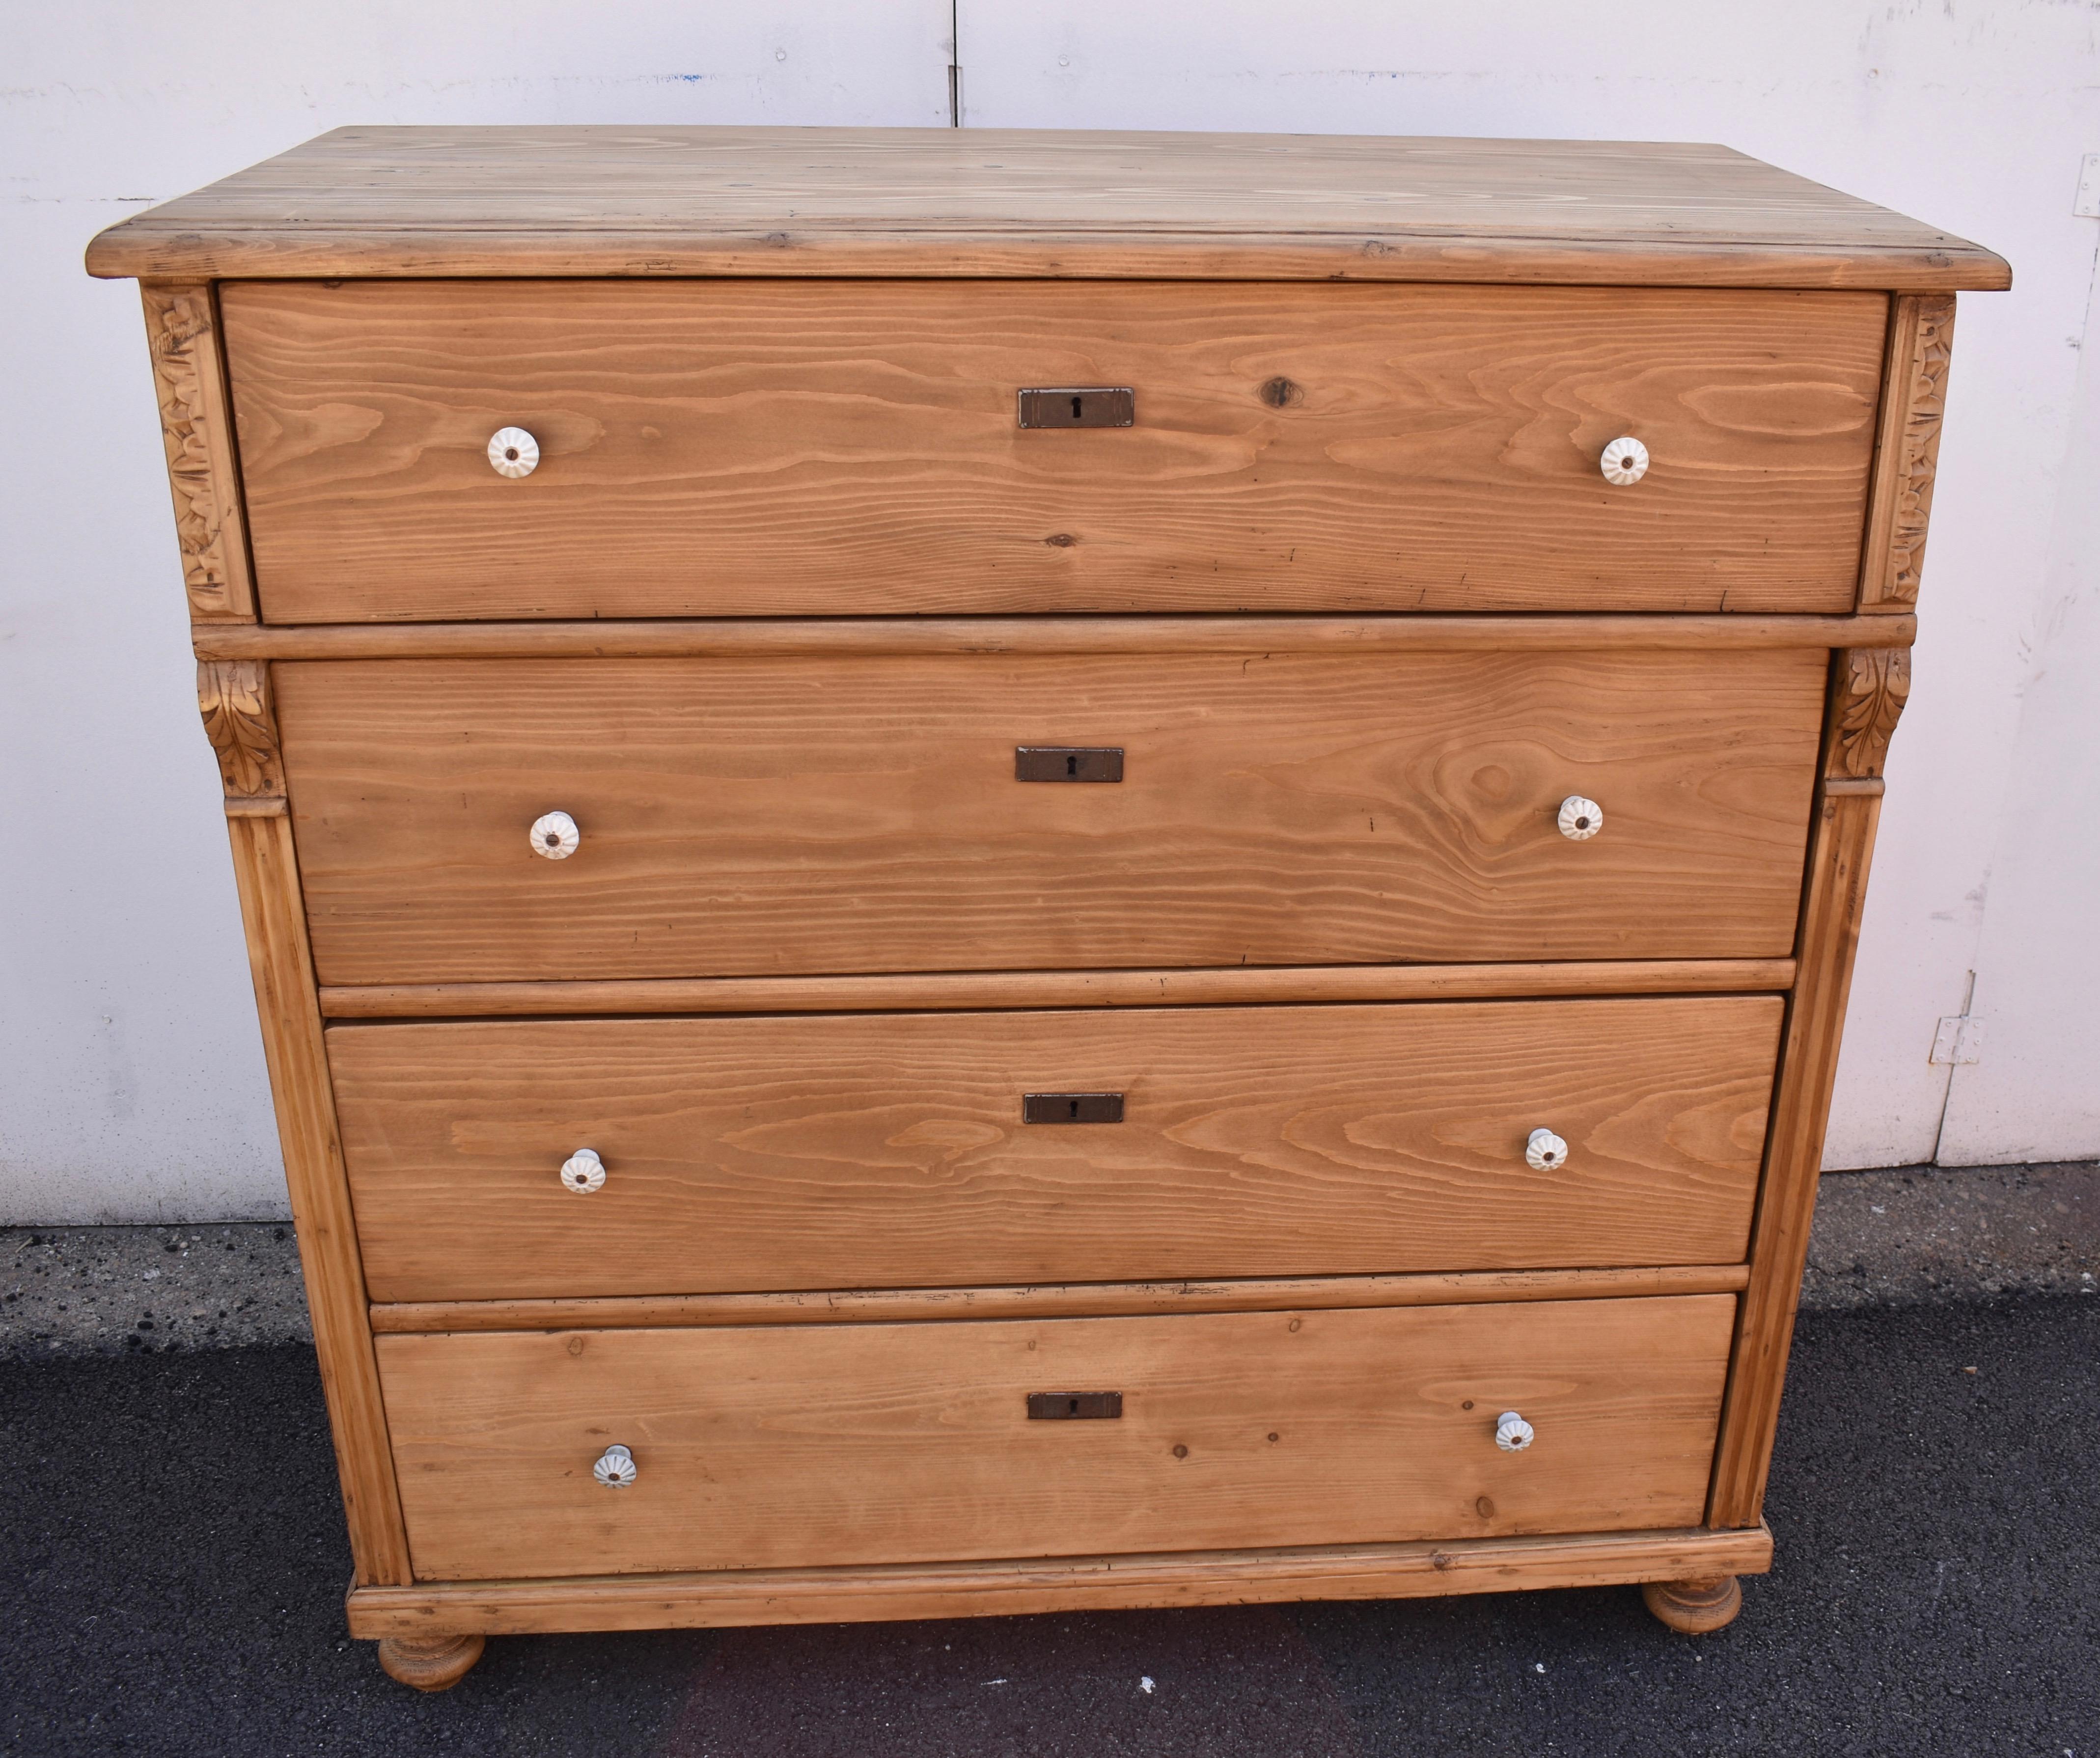 This massive chest of four deep hand-cut dovetailed drawers has the usual step-down edge to the top but at 23” deep it is more shallow than most chests as tall and wide as this one. The front corners have applied fluting and acanthus leaf corbels